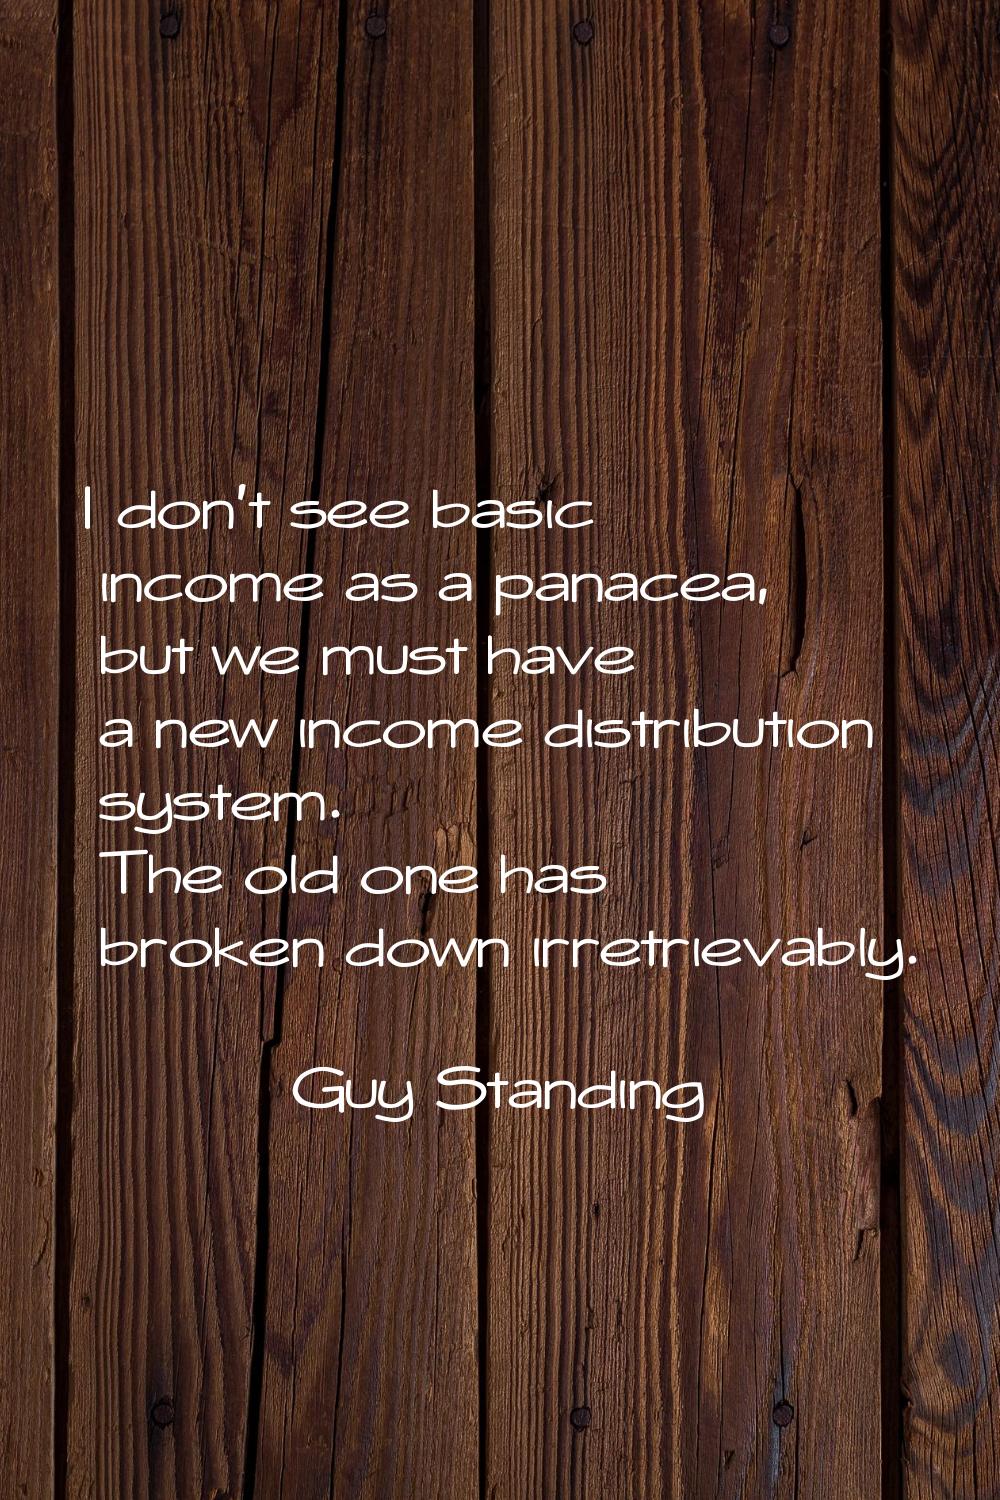 I don't see basic income as a panacea, but we must have a new income distribution system. The old o